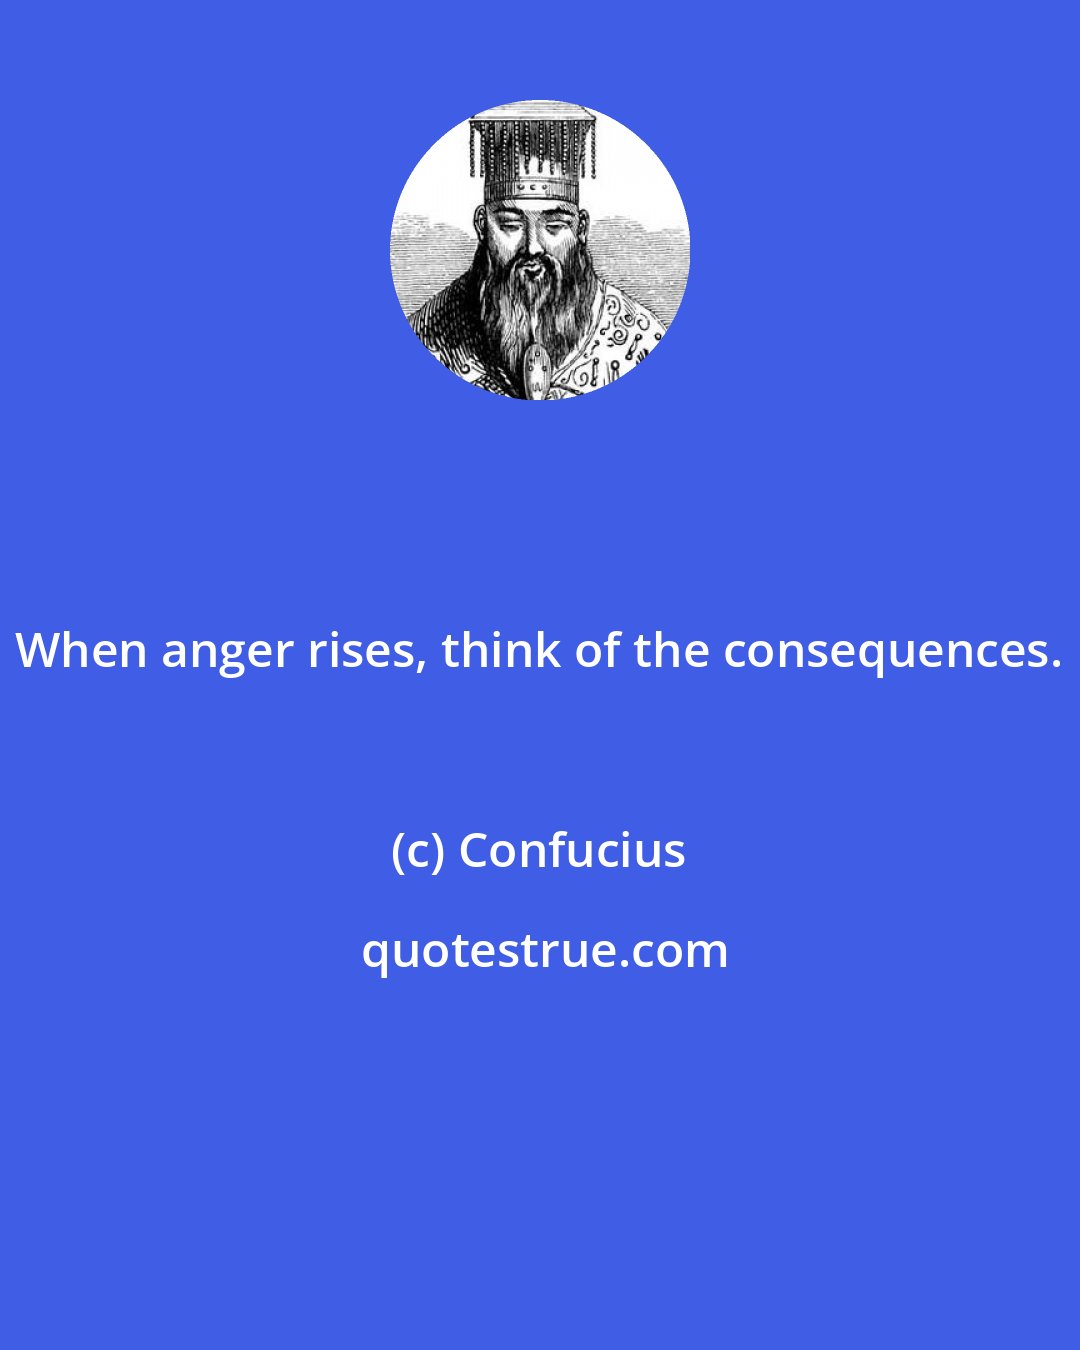 Confucius: When anger rises, think of the consequences.